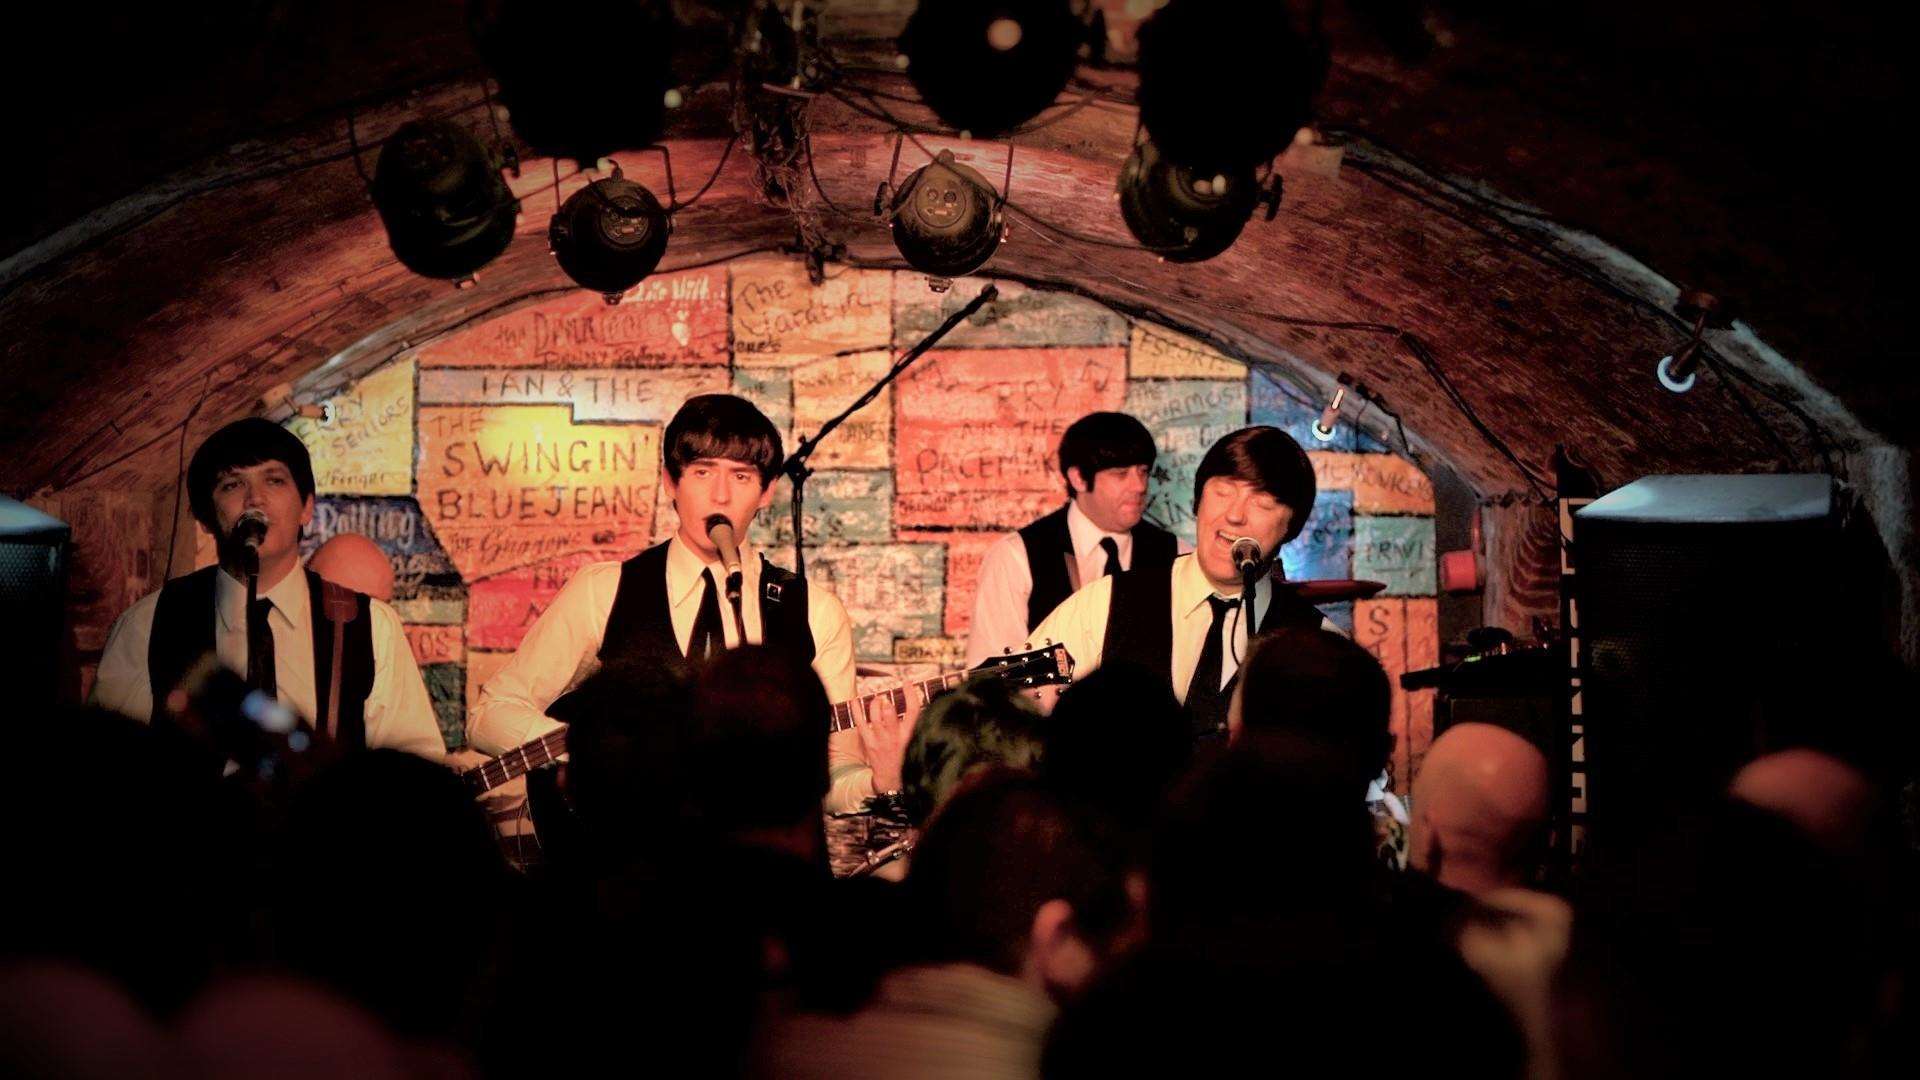 The Mersey Beatles were once the Cavern Club's resident band (5592943)